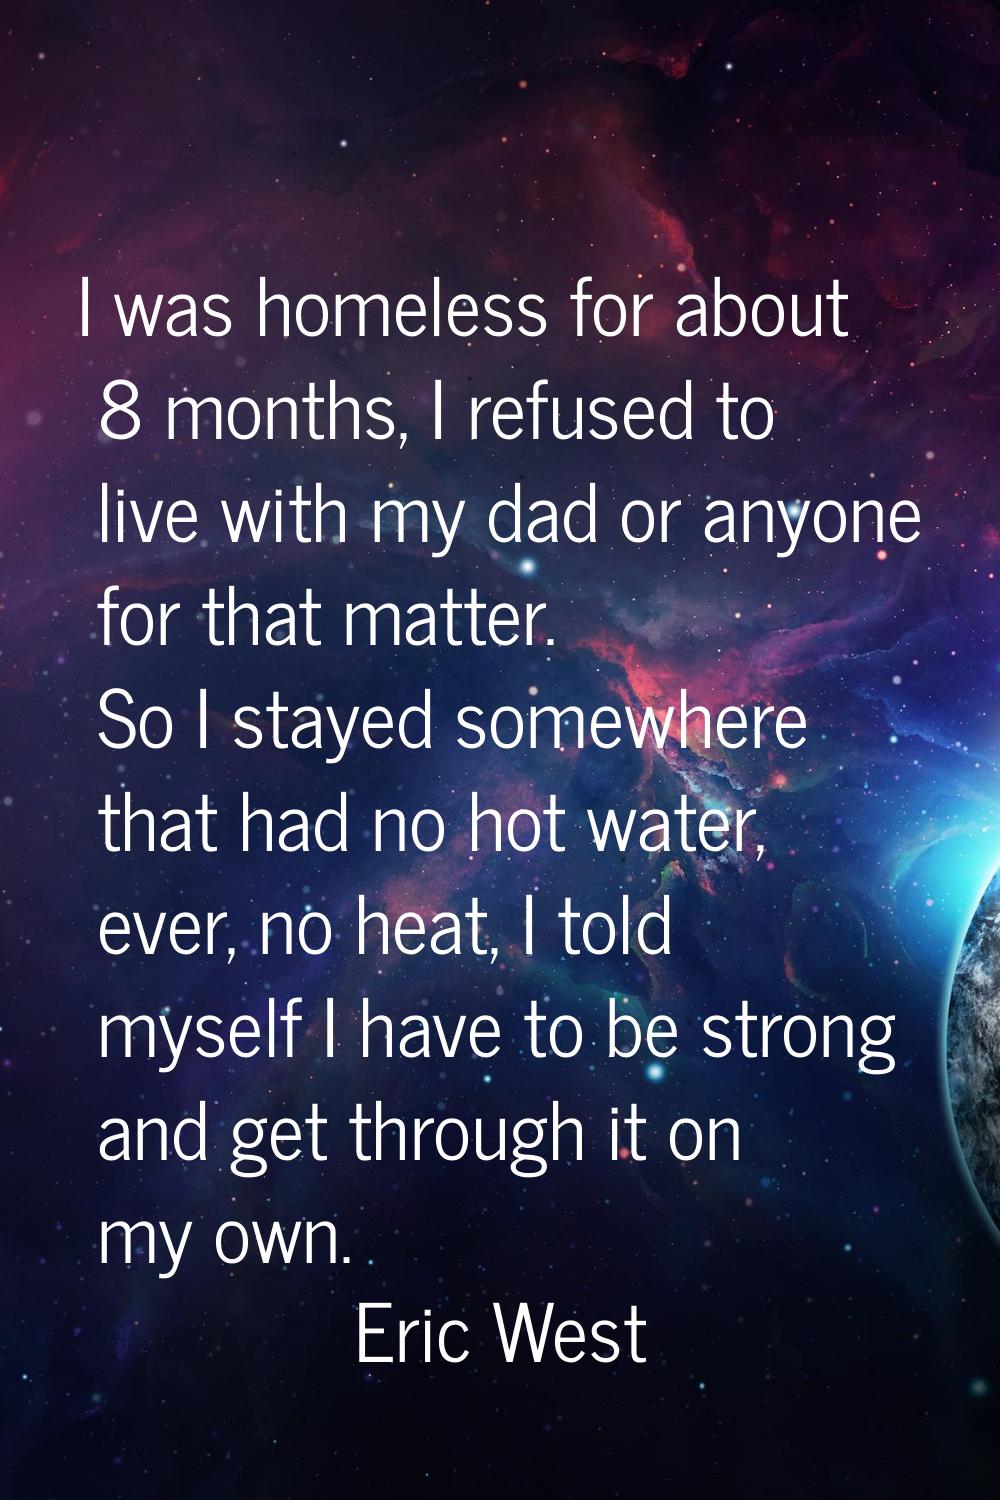 I was homeless for about 8 months, I refused to live with my dad or anyone for that matter. So I st